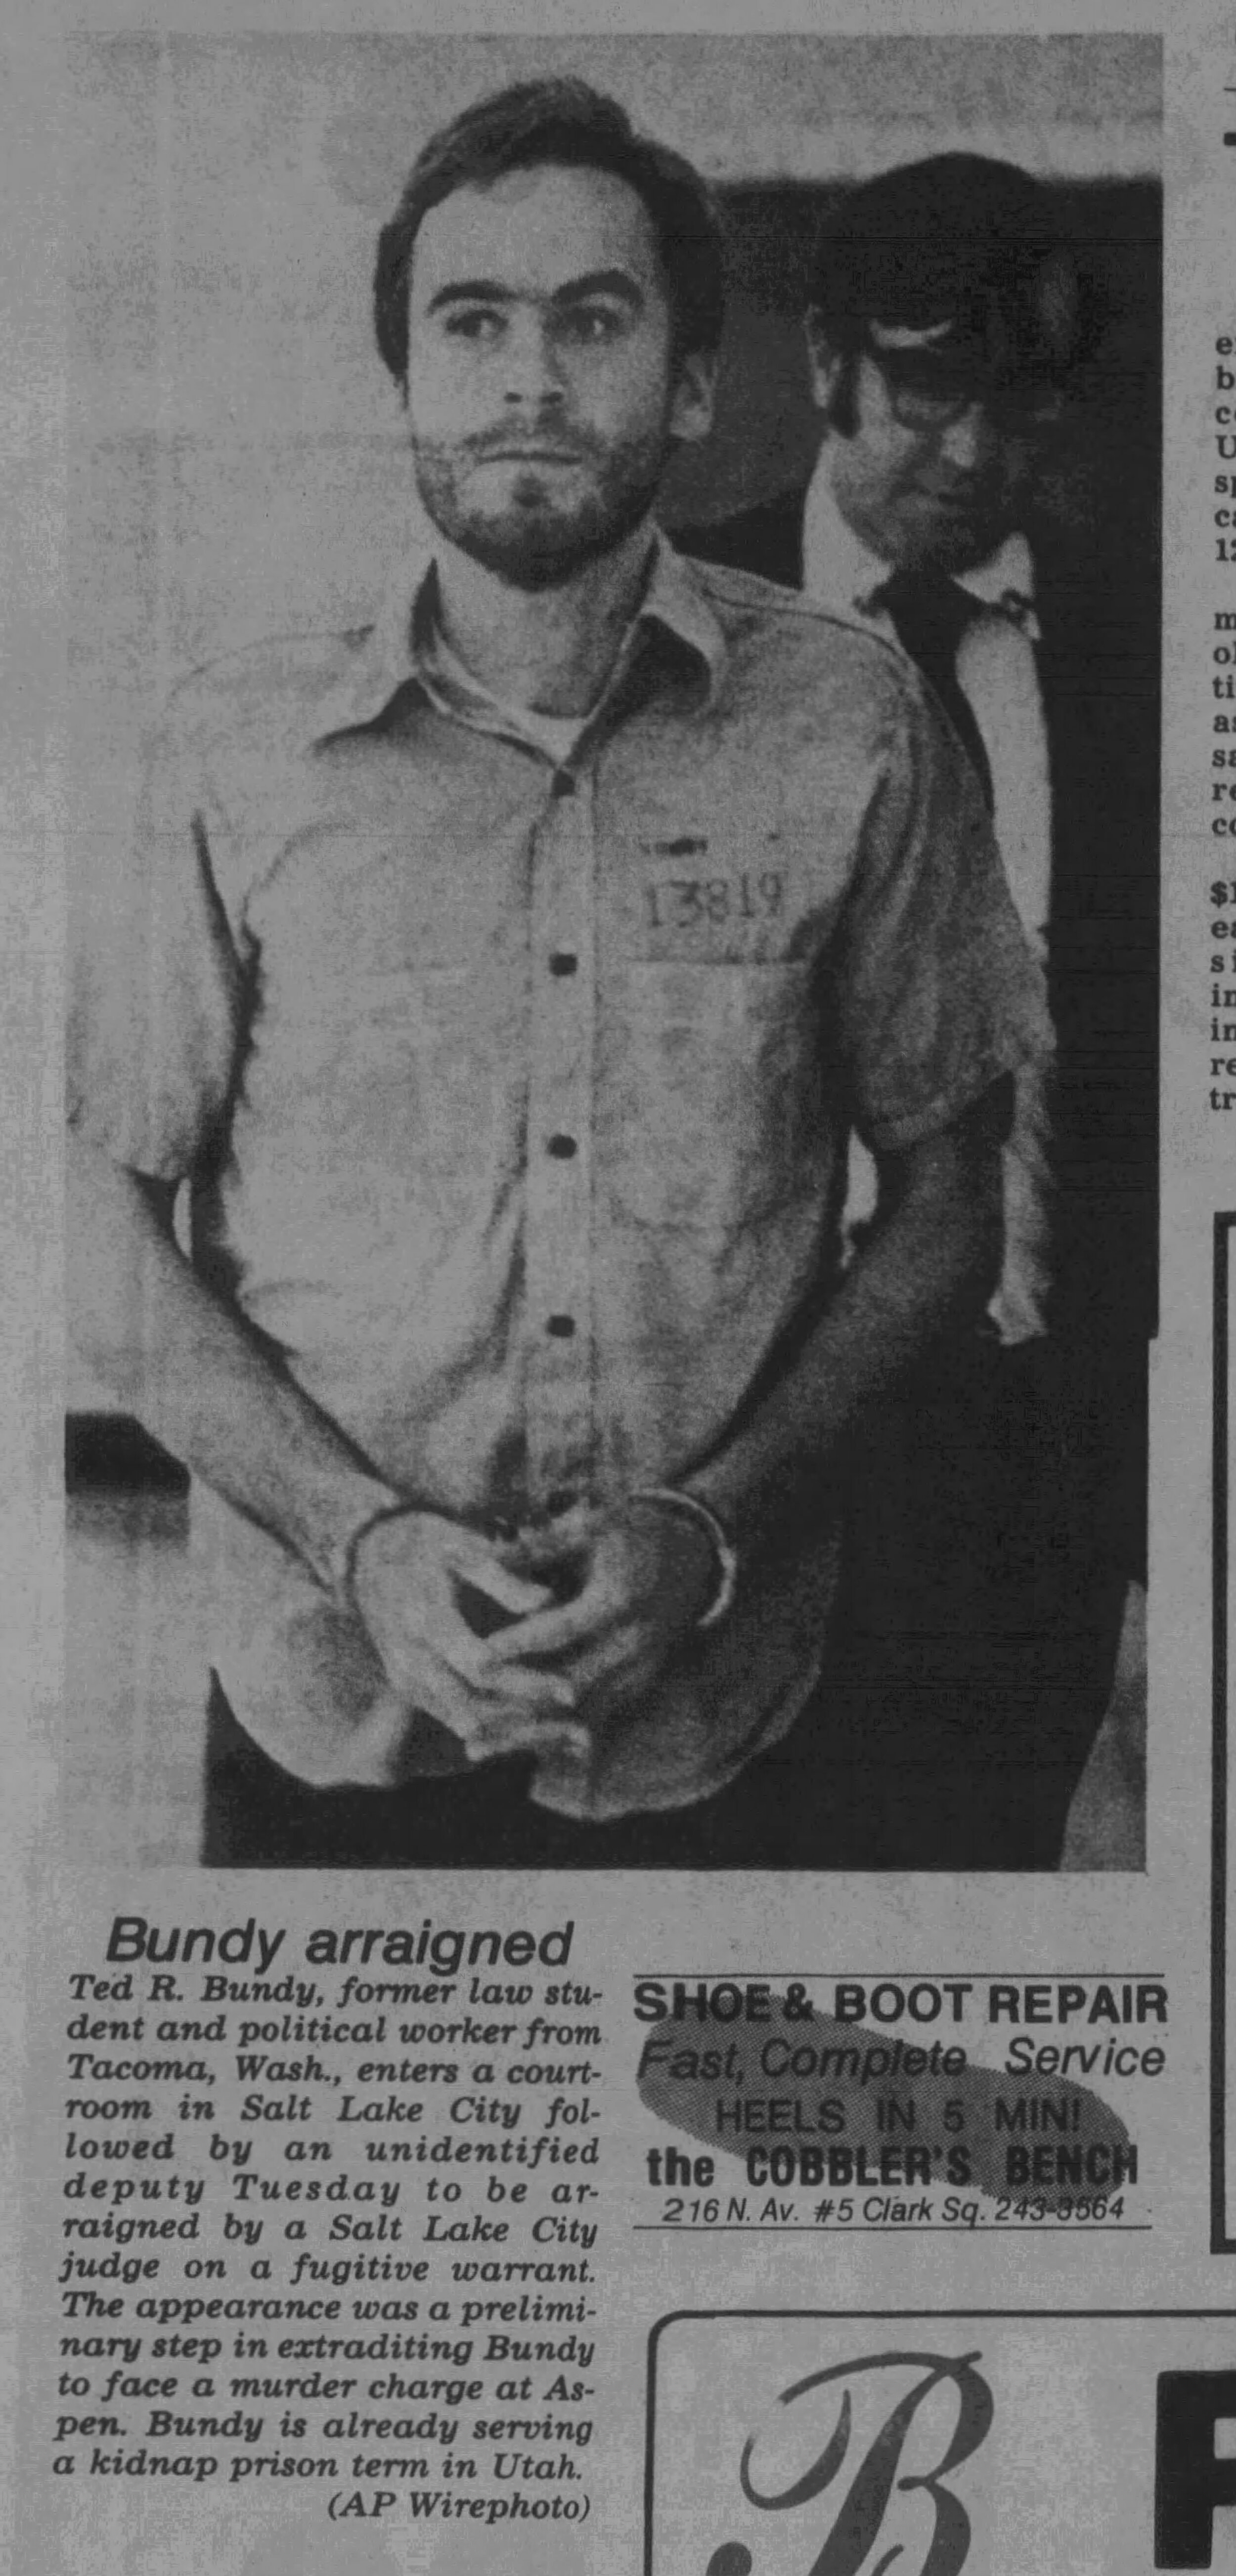   Source: The Daily Sentinel 27 Oct 1976  